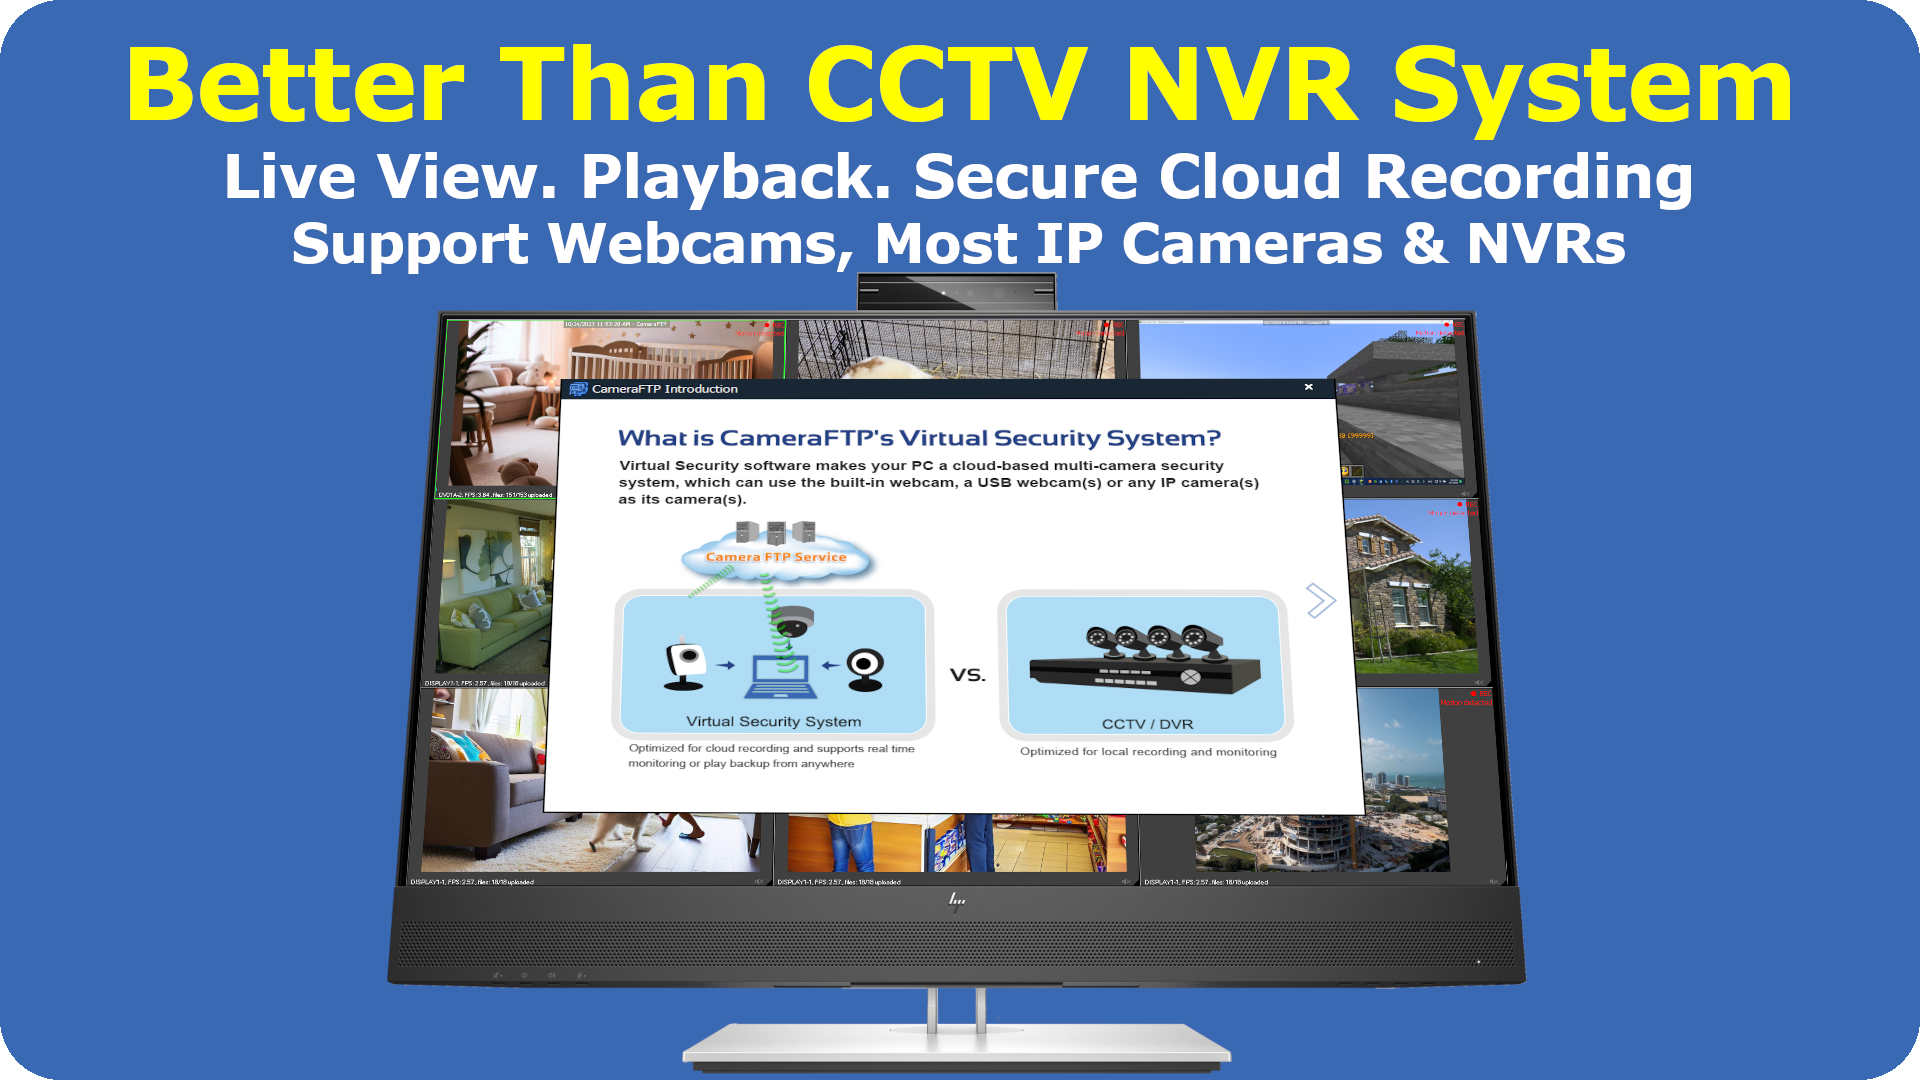 CameraFTP VSS is better and easier than a regular CCTV NVR System. You can setup instantly using webcam as an IP camera and a PC as an NVR system